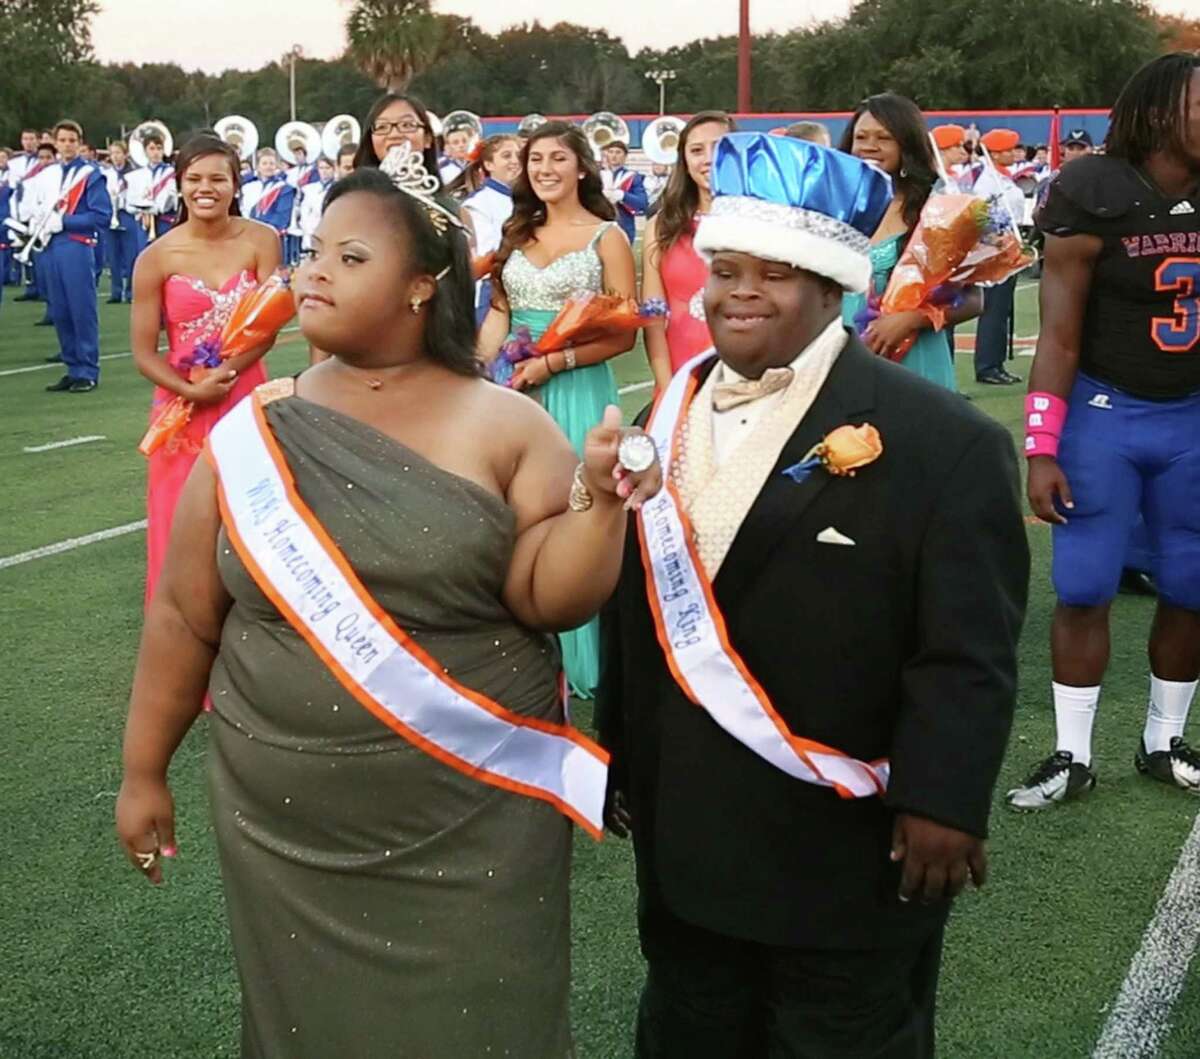 Bubba Hunter and Semone Adkins were crowned homecoming king and queen at West Orange High School in October 2013 in Winter Garden, Fla. Hunter died Friday after a battle with pneumonia. He was 20. (Stephen M. Dowell/Orlando Sentinel/TNS)